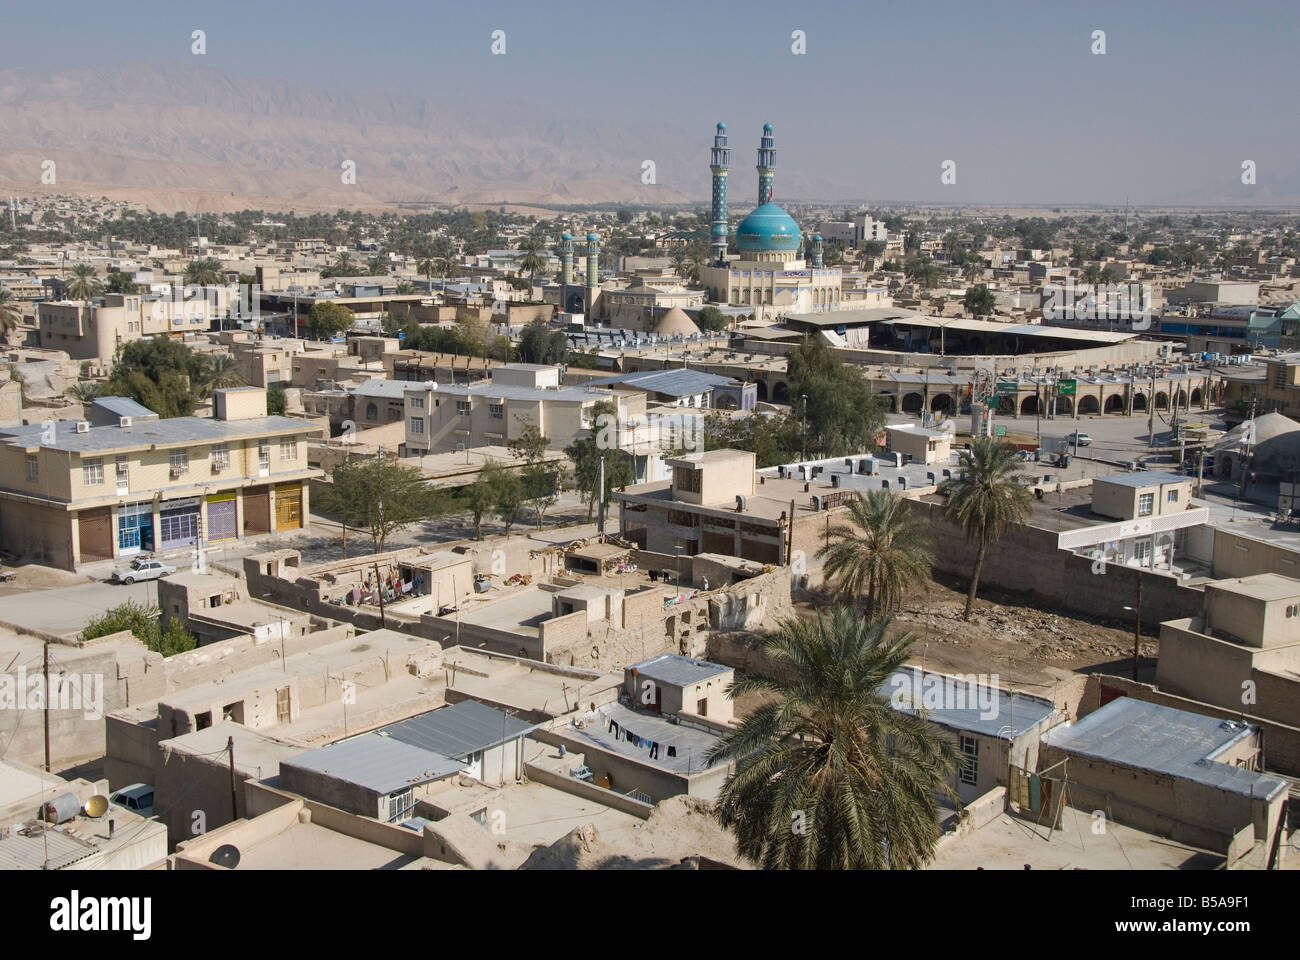 Main mosque and new souk in centre of desert town Lar city Fars province southern Iran Middle East Stock Photo